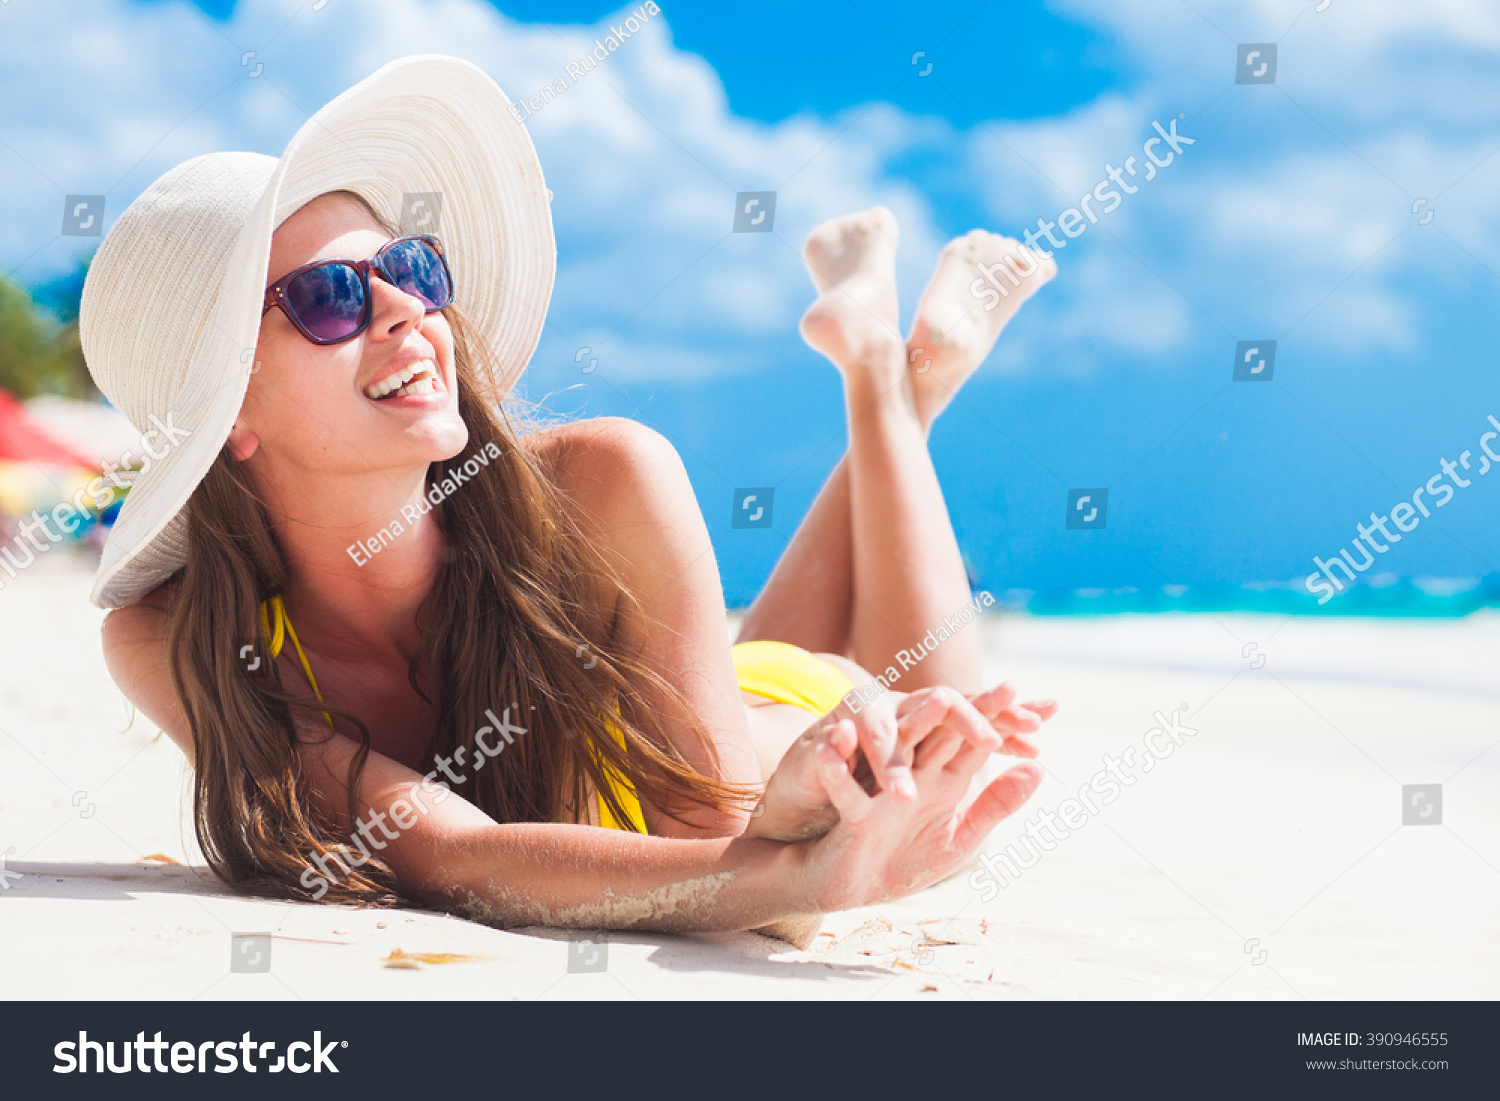 woman in bikini and sun hat relaxing at sunny beach. remote tropical beaches and countries. travel concept #390946555